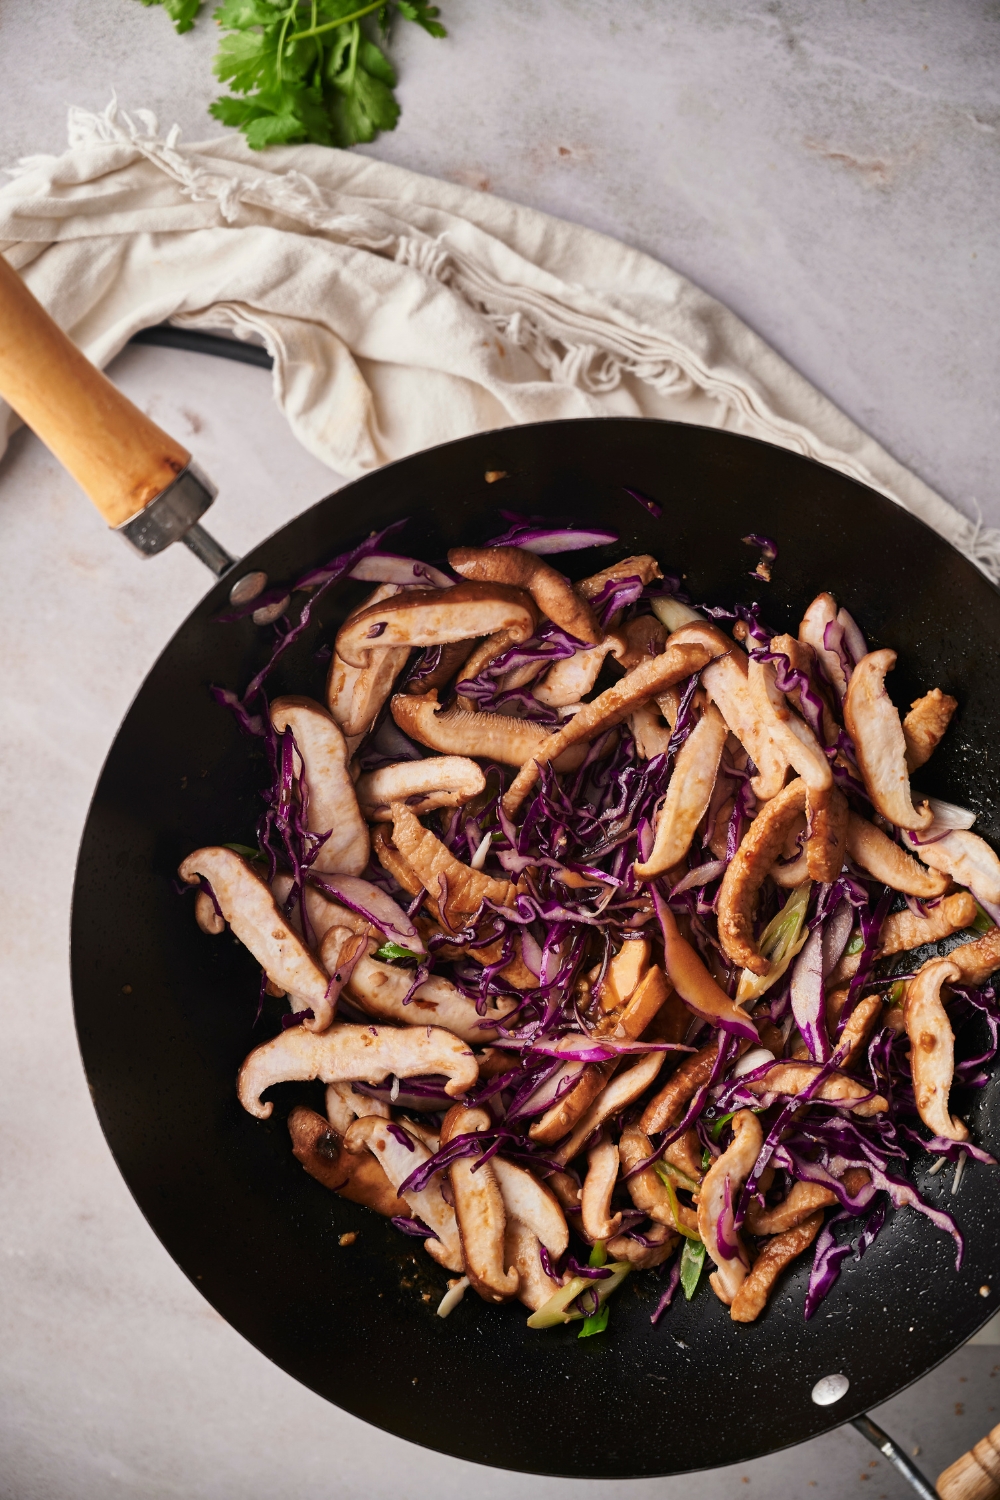 Part of a skillet with moo shu pork and shredded purple cabbage in a wok.